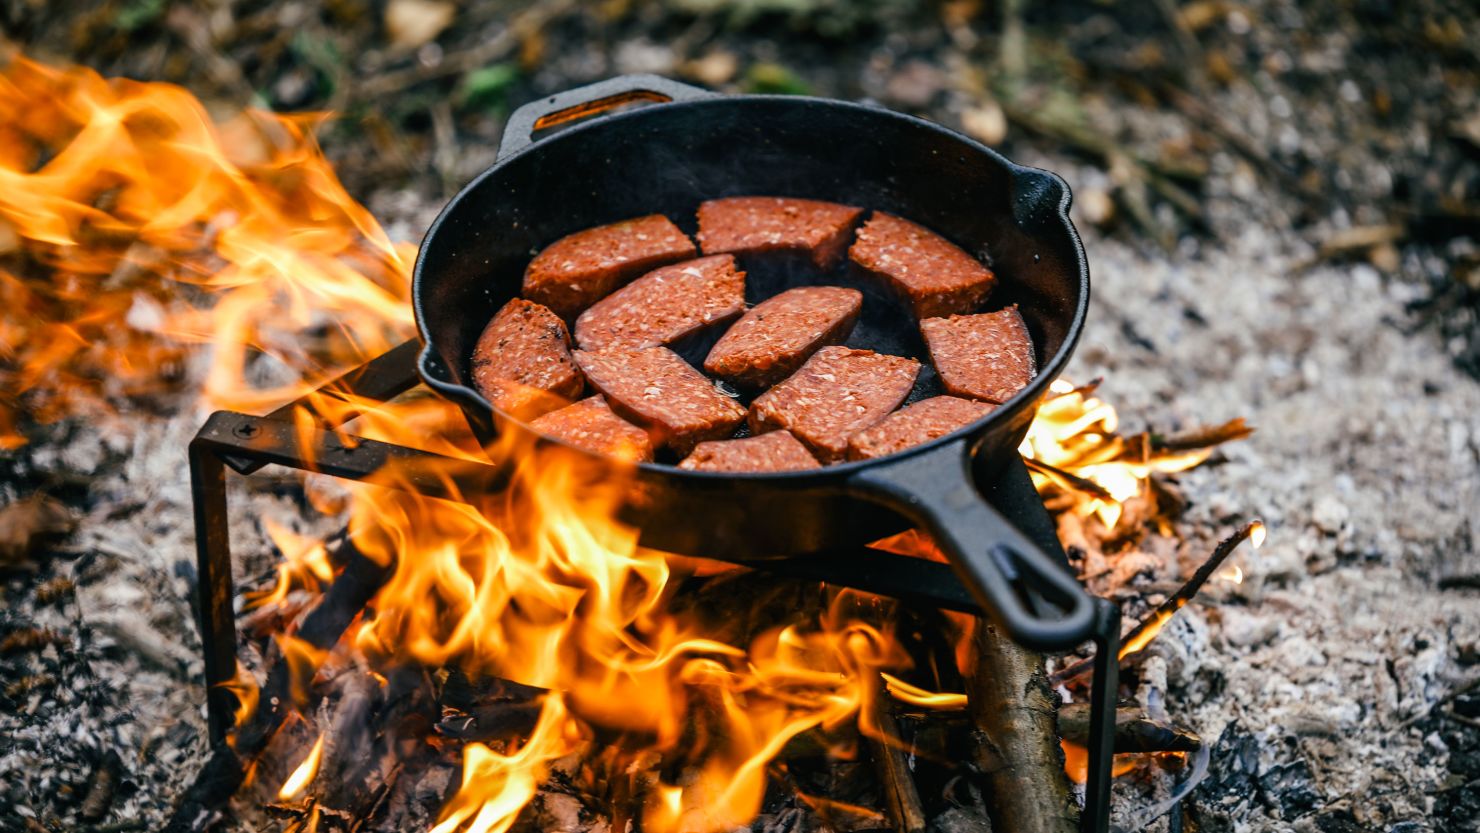 How to use a grill pan, inside or outdoors - The Washington Post